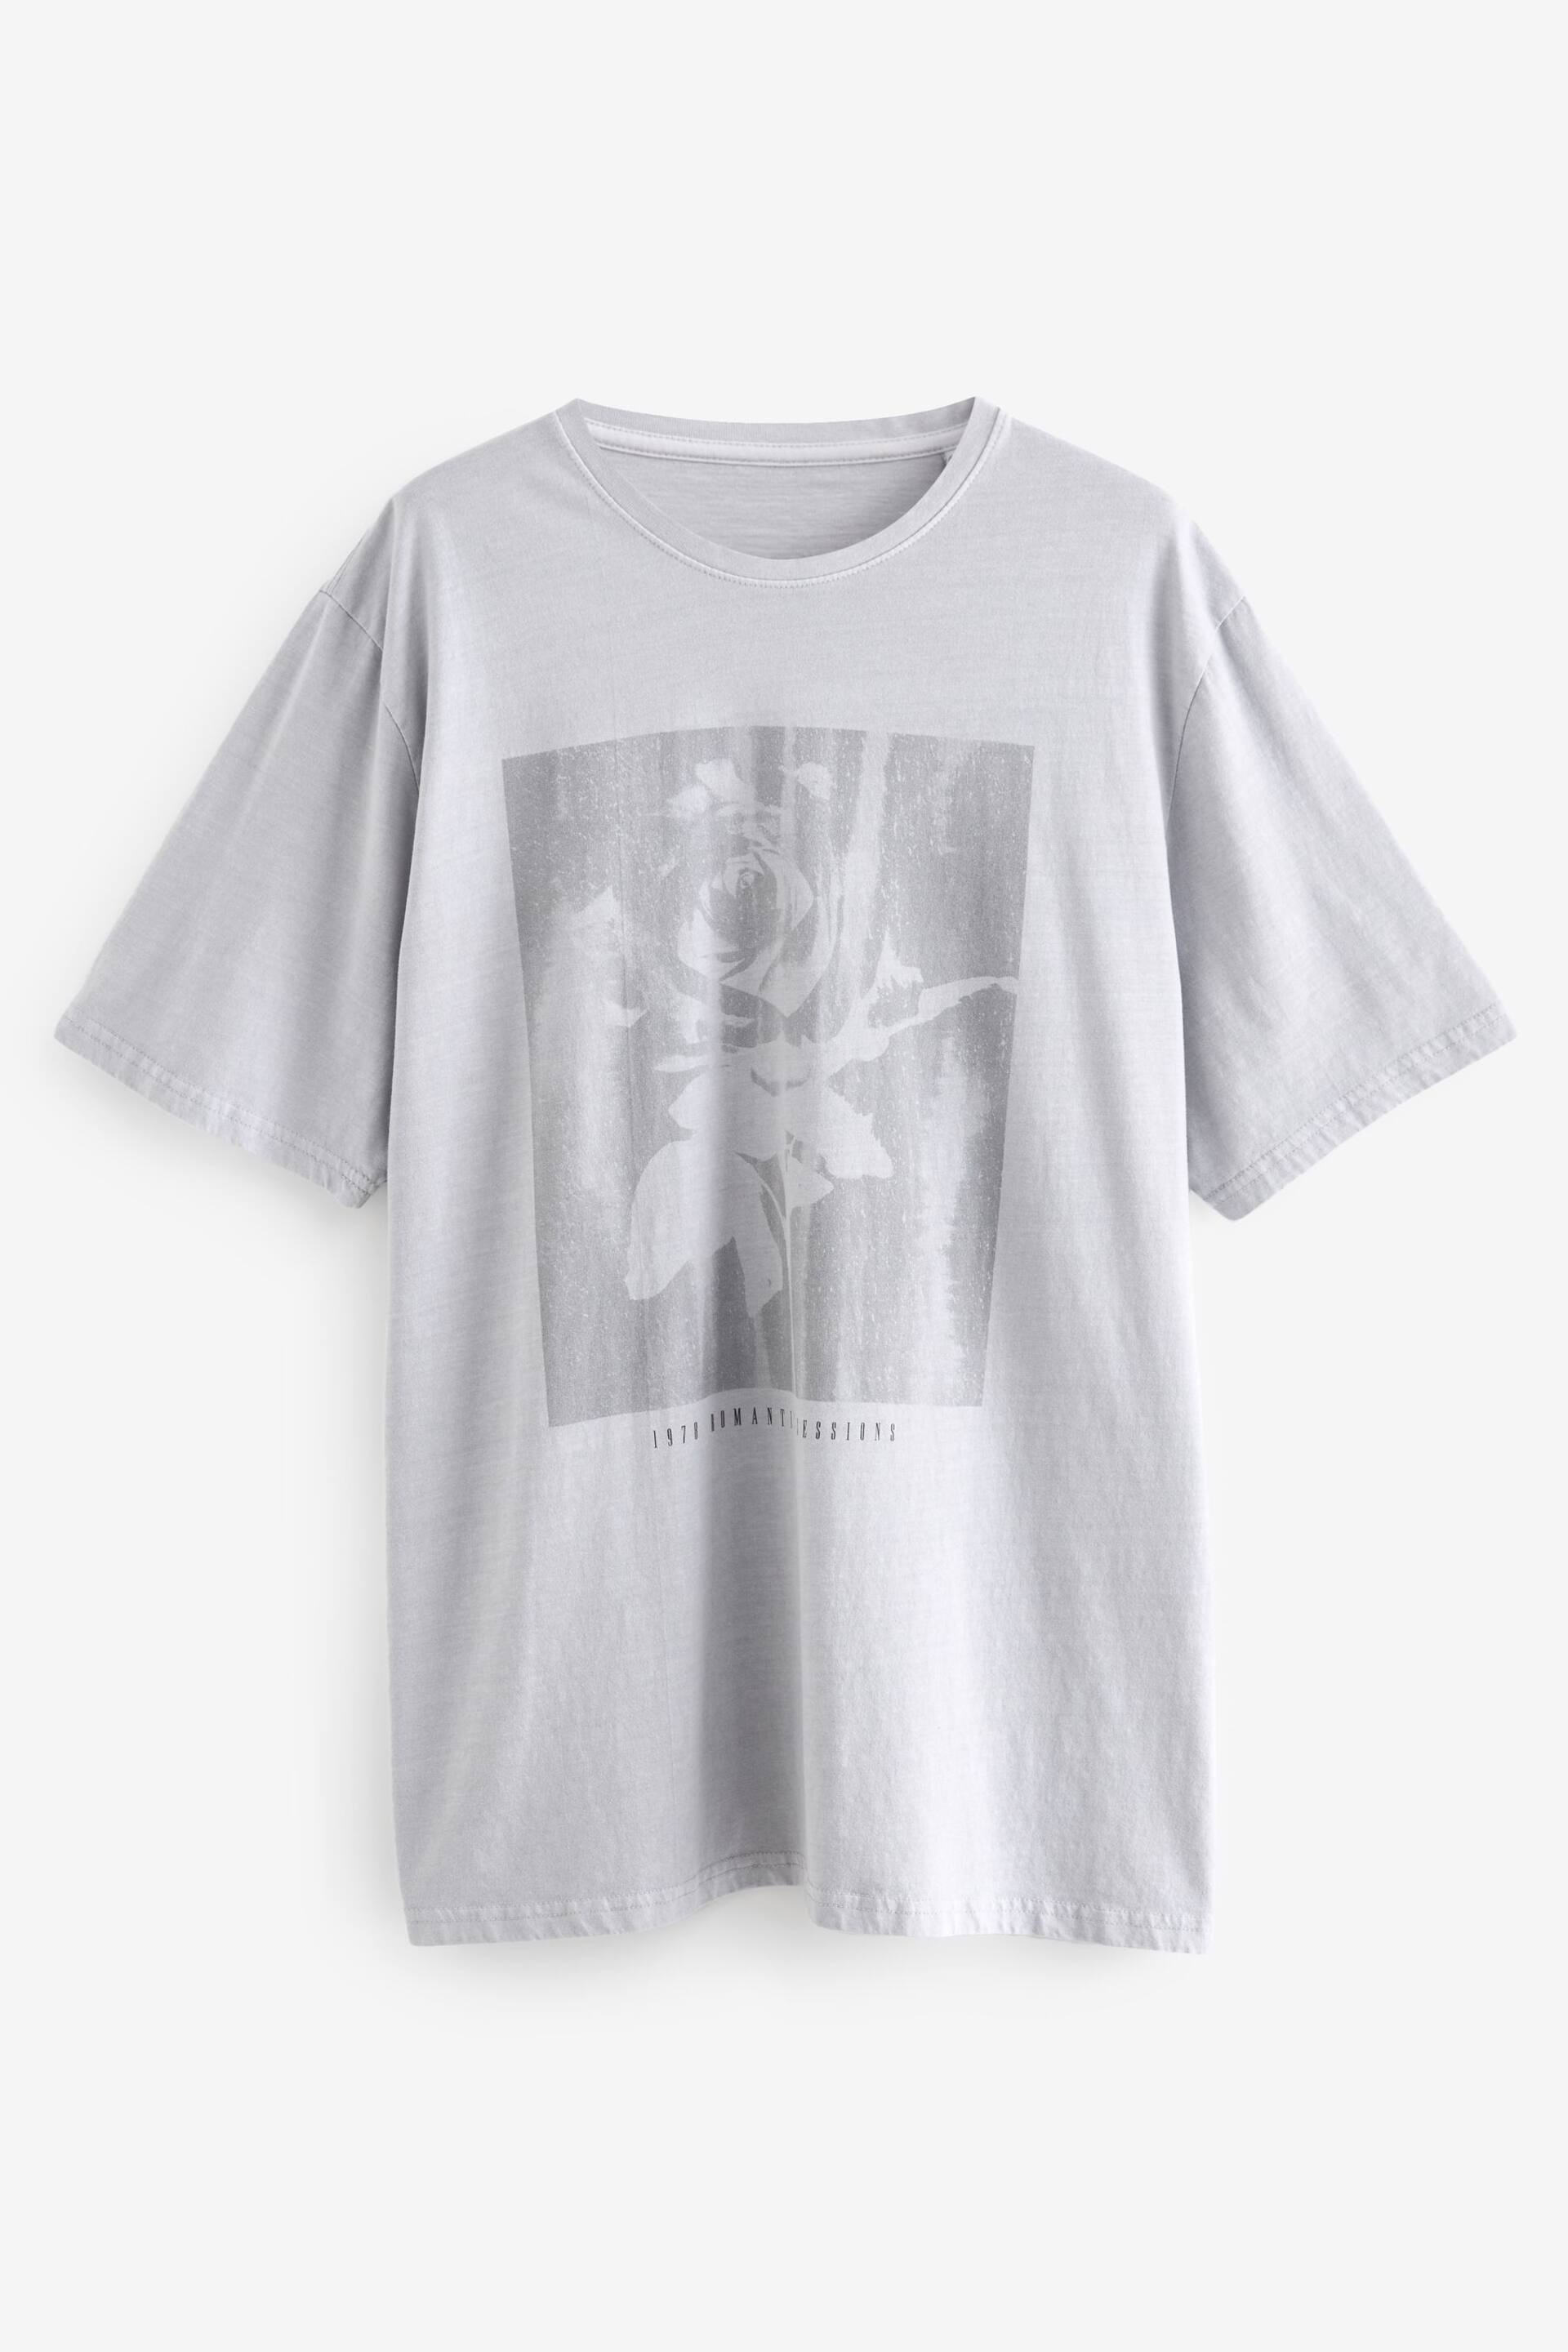 Grey Wash Grungy Rose Graphic T-Shirt - Image 5 of 6